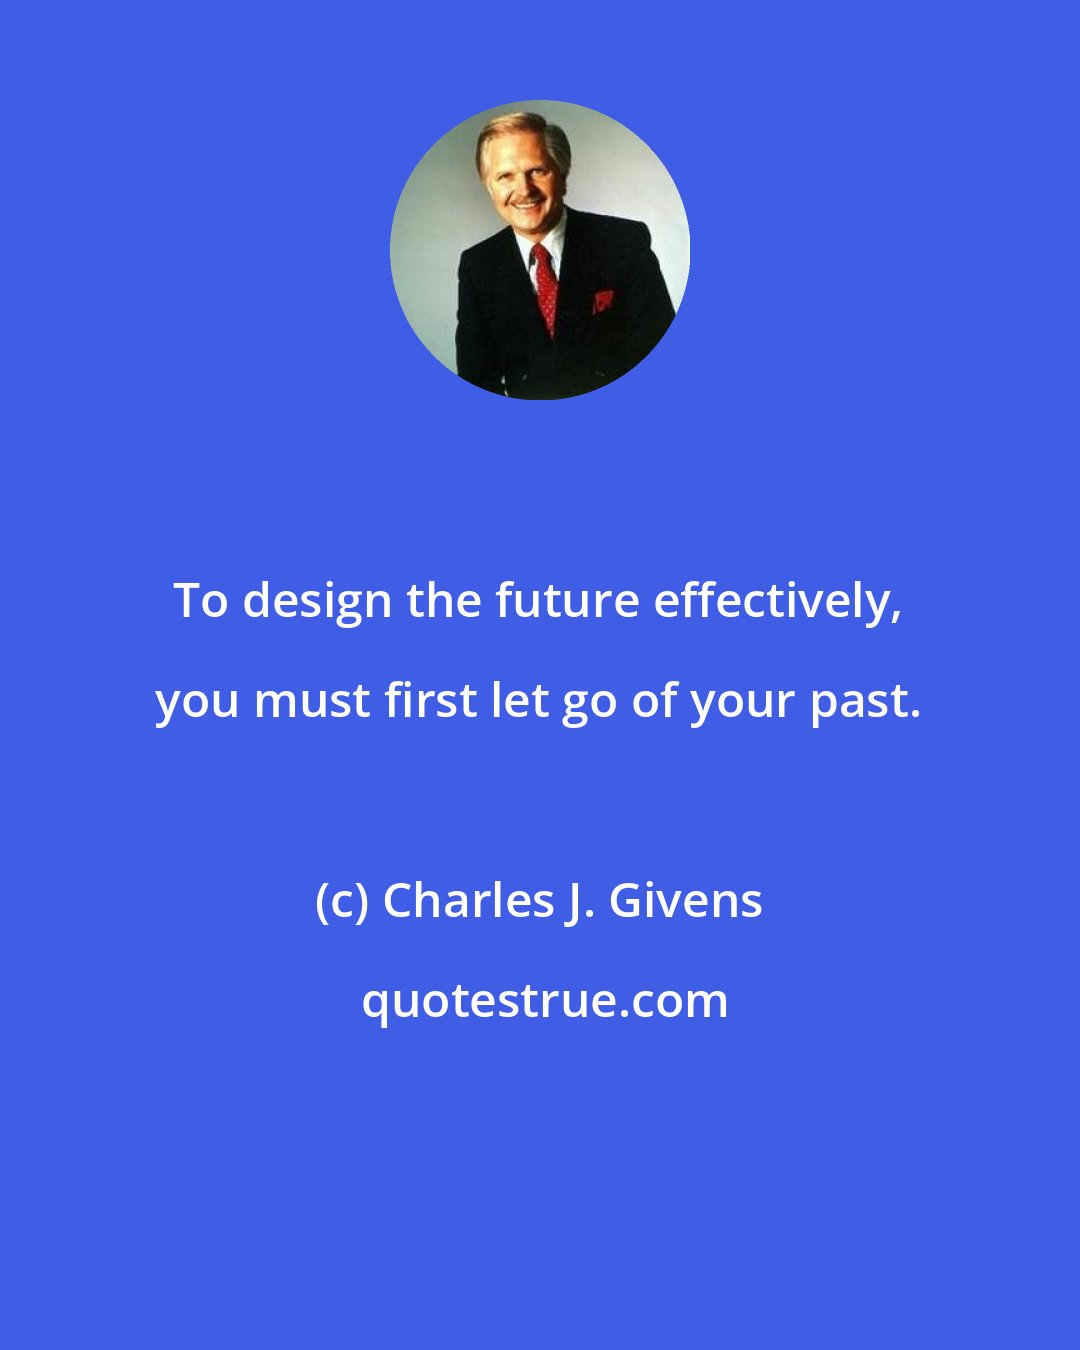 Charles J. Givens: To design the future effectively, you must first let go of your past.